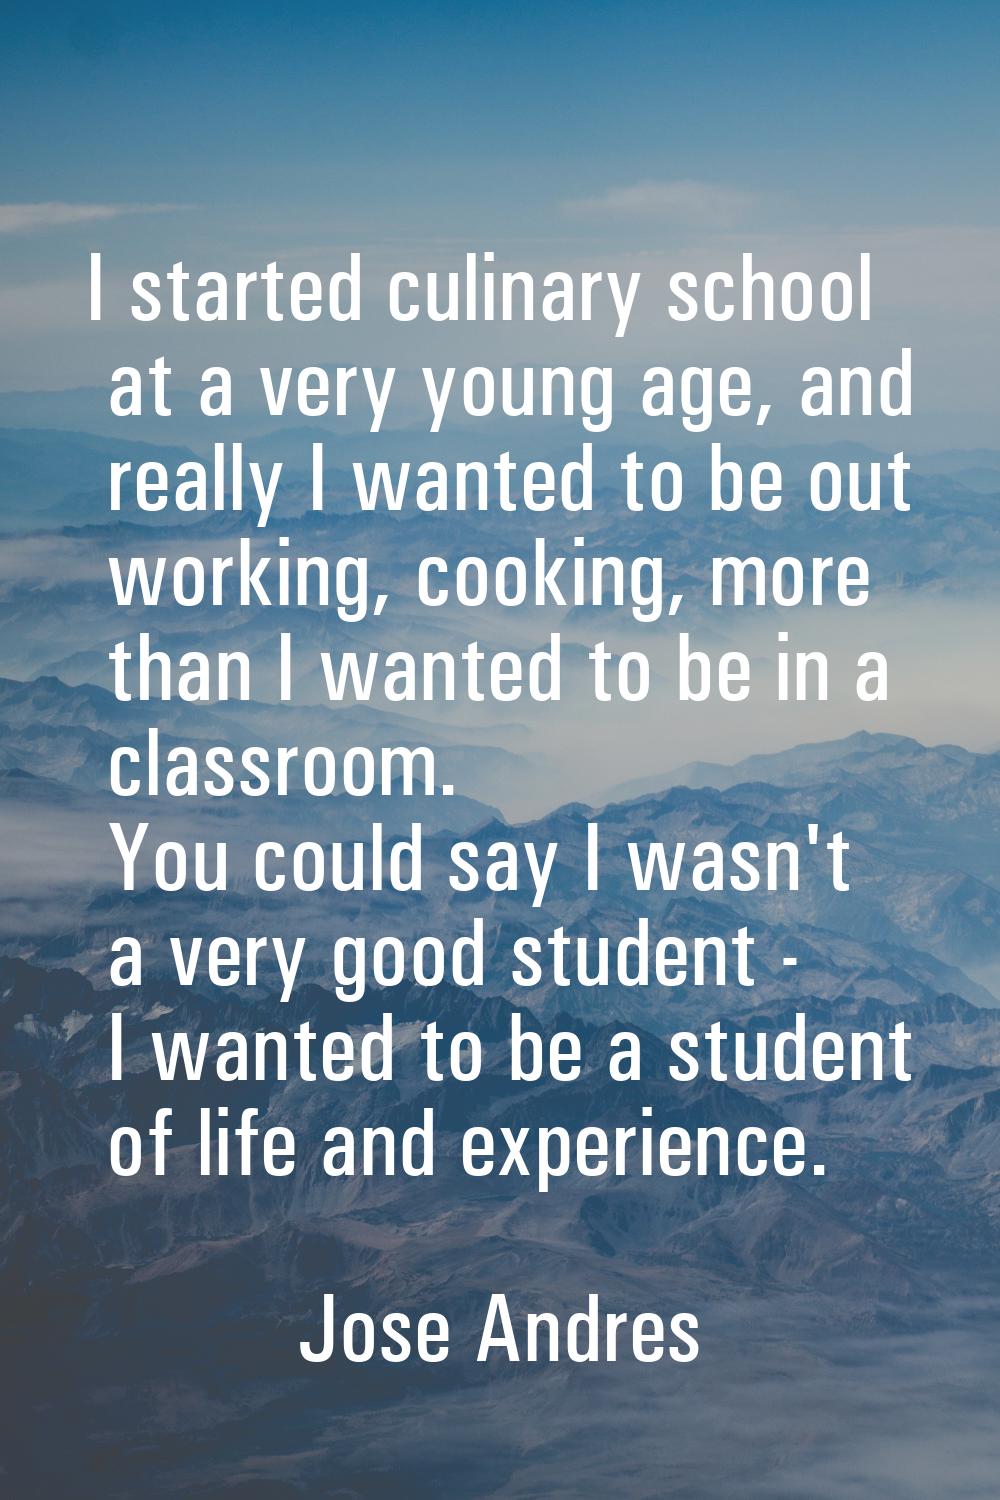 I started culinary school at a very young age, and really I wanted to be out working, cooking, more